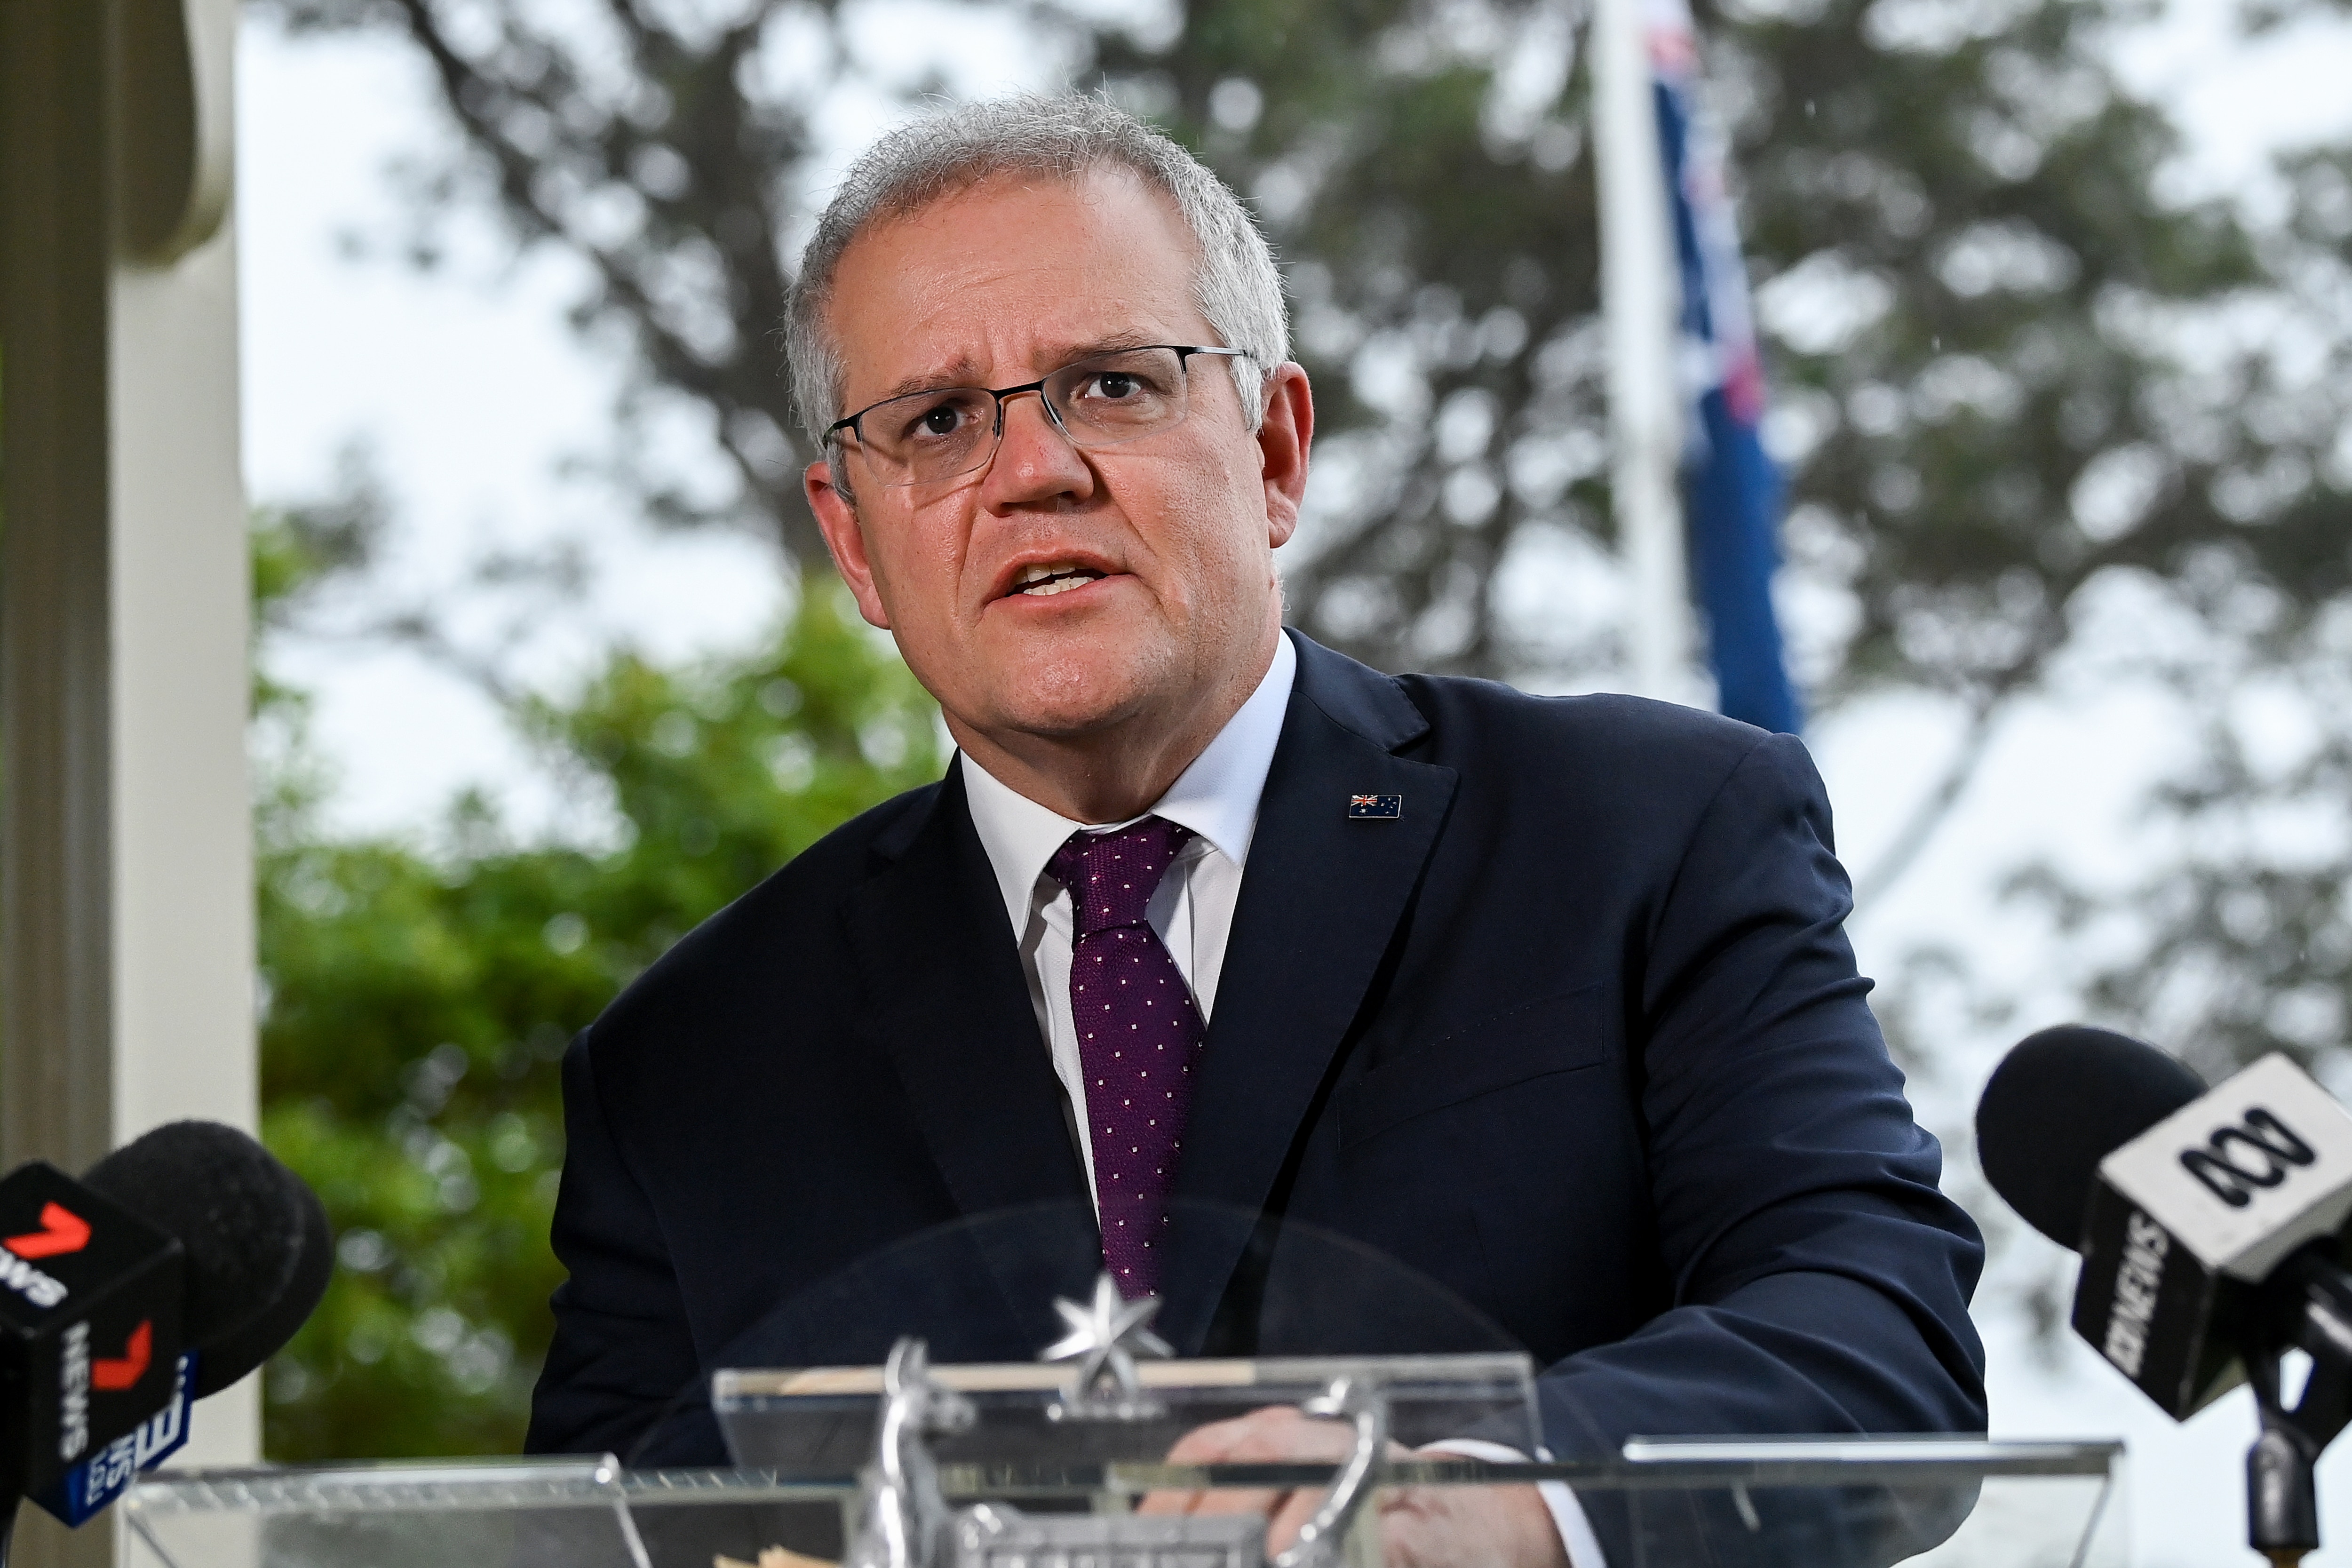 Prime Minister Scott Morrison speaks to the media during a press conference at Kirribilli House in Sydney.